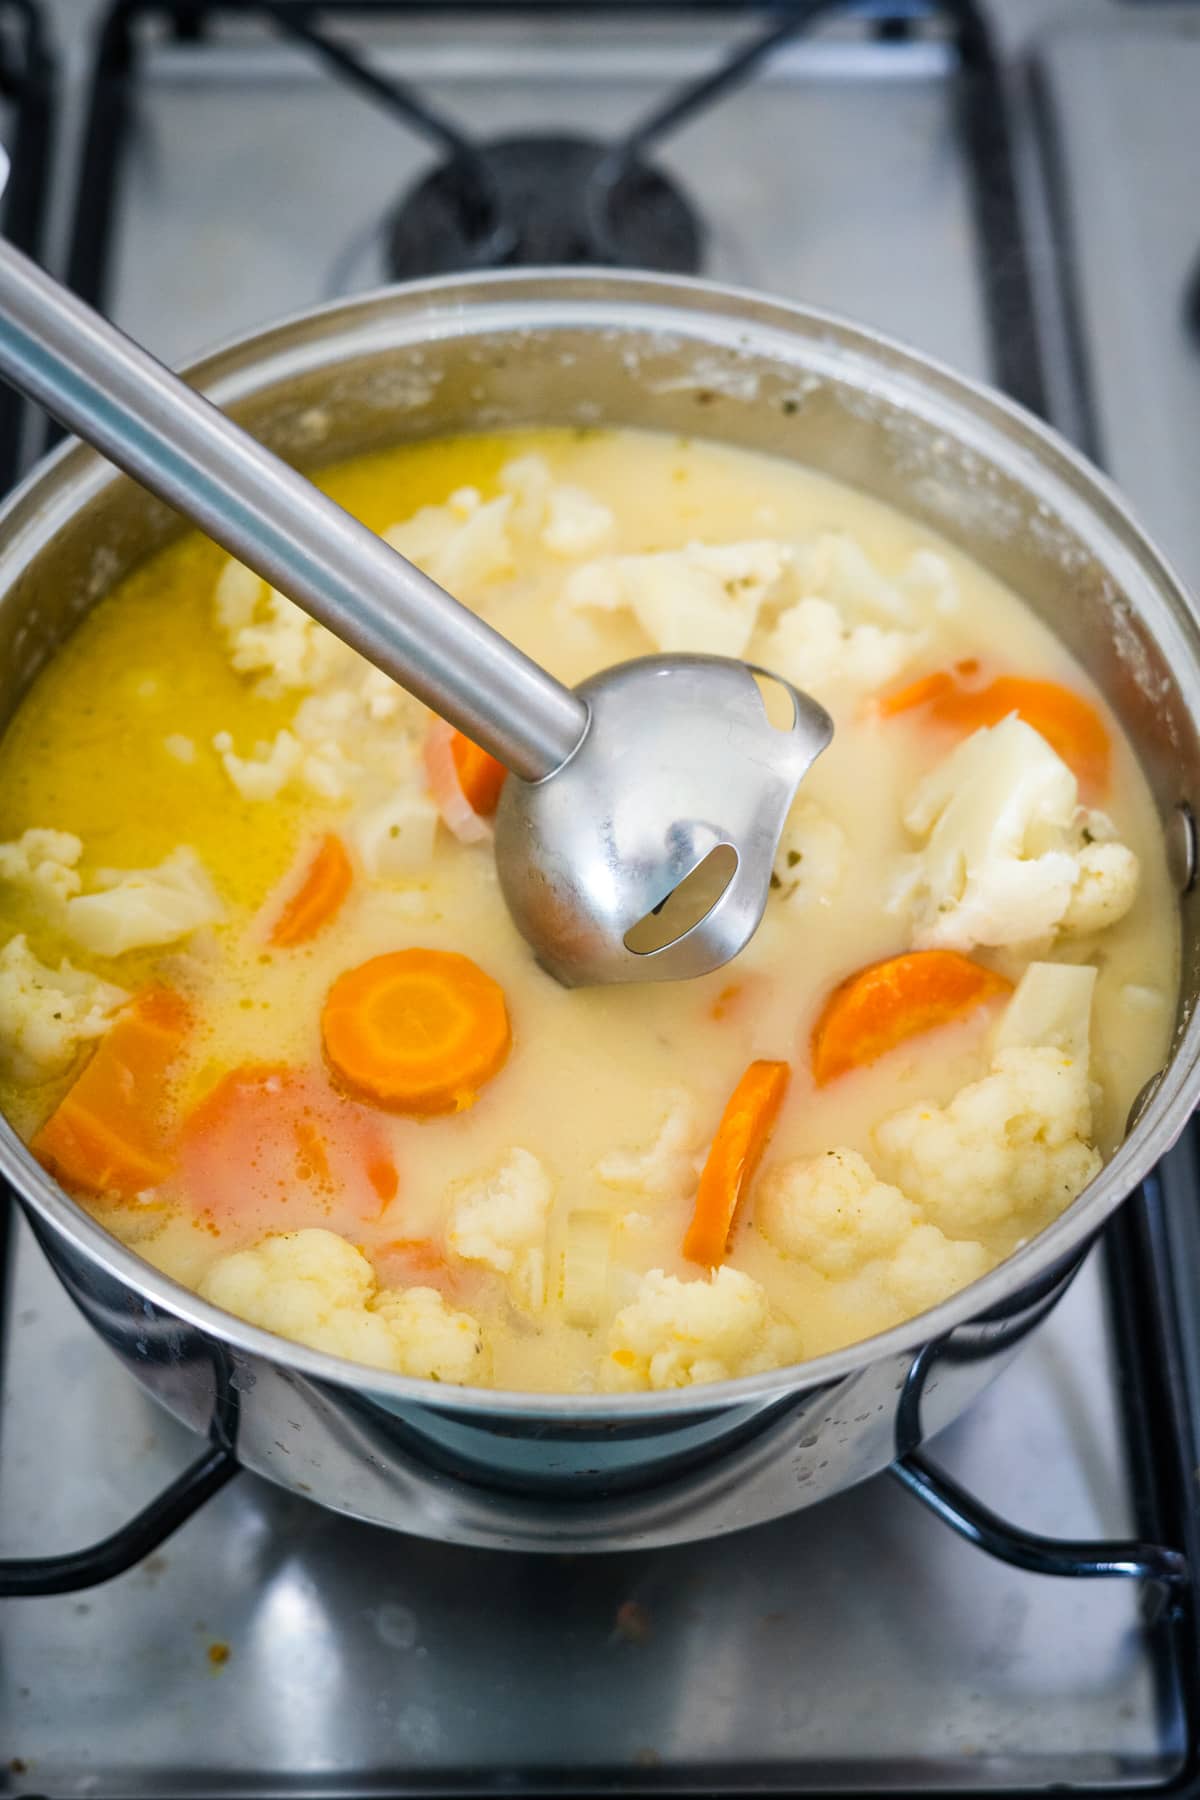 A pot of soup with carrots and cauliflower on the stove.